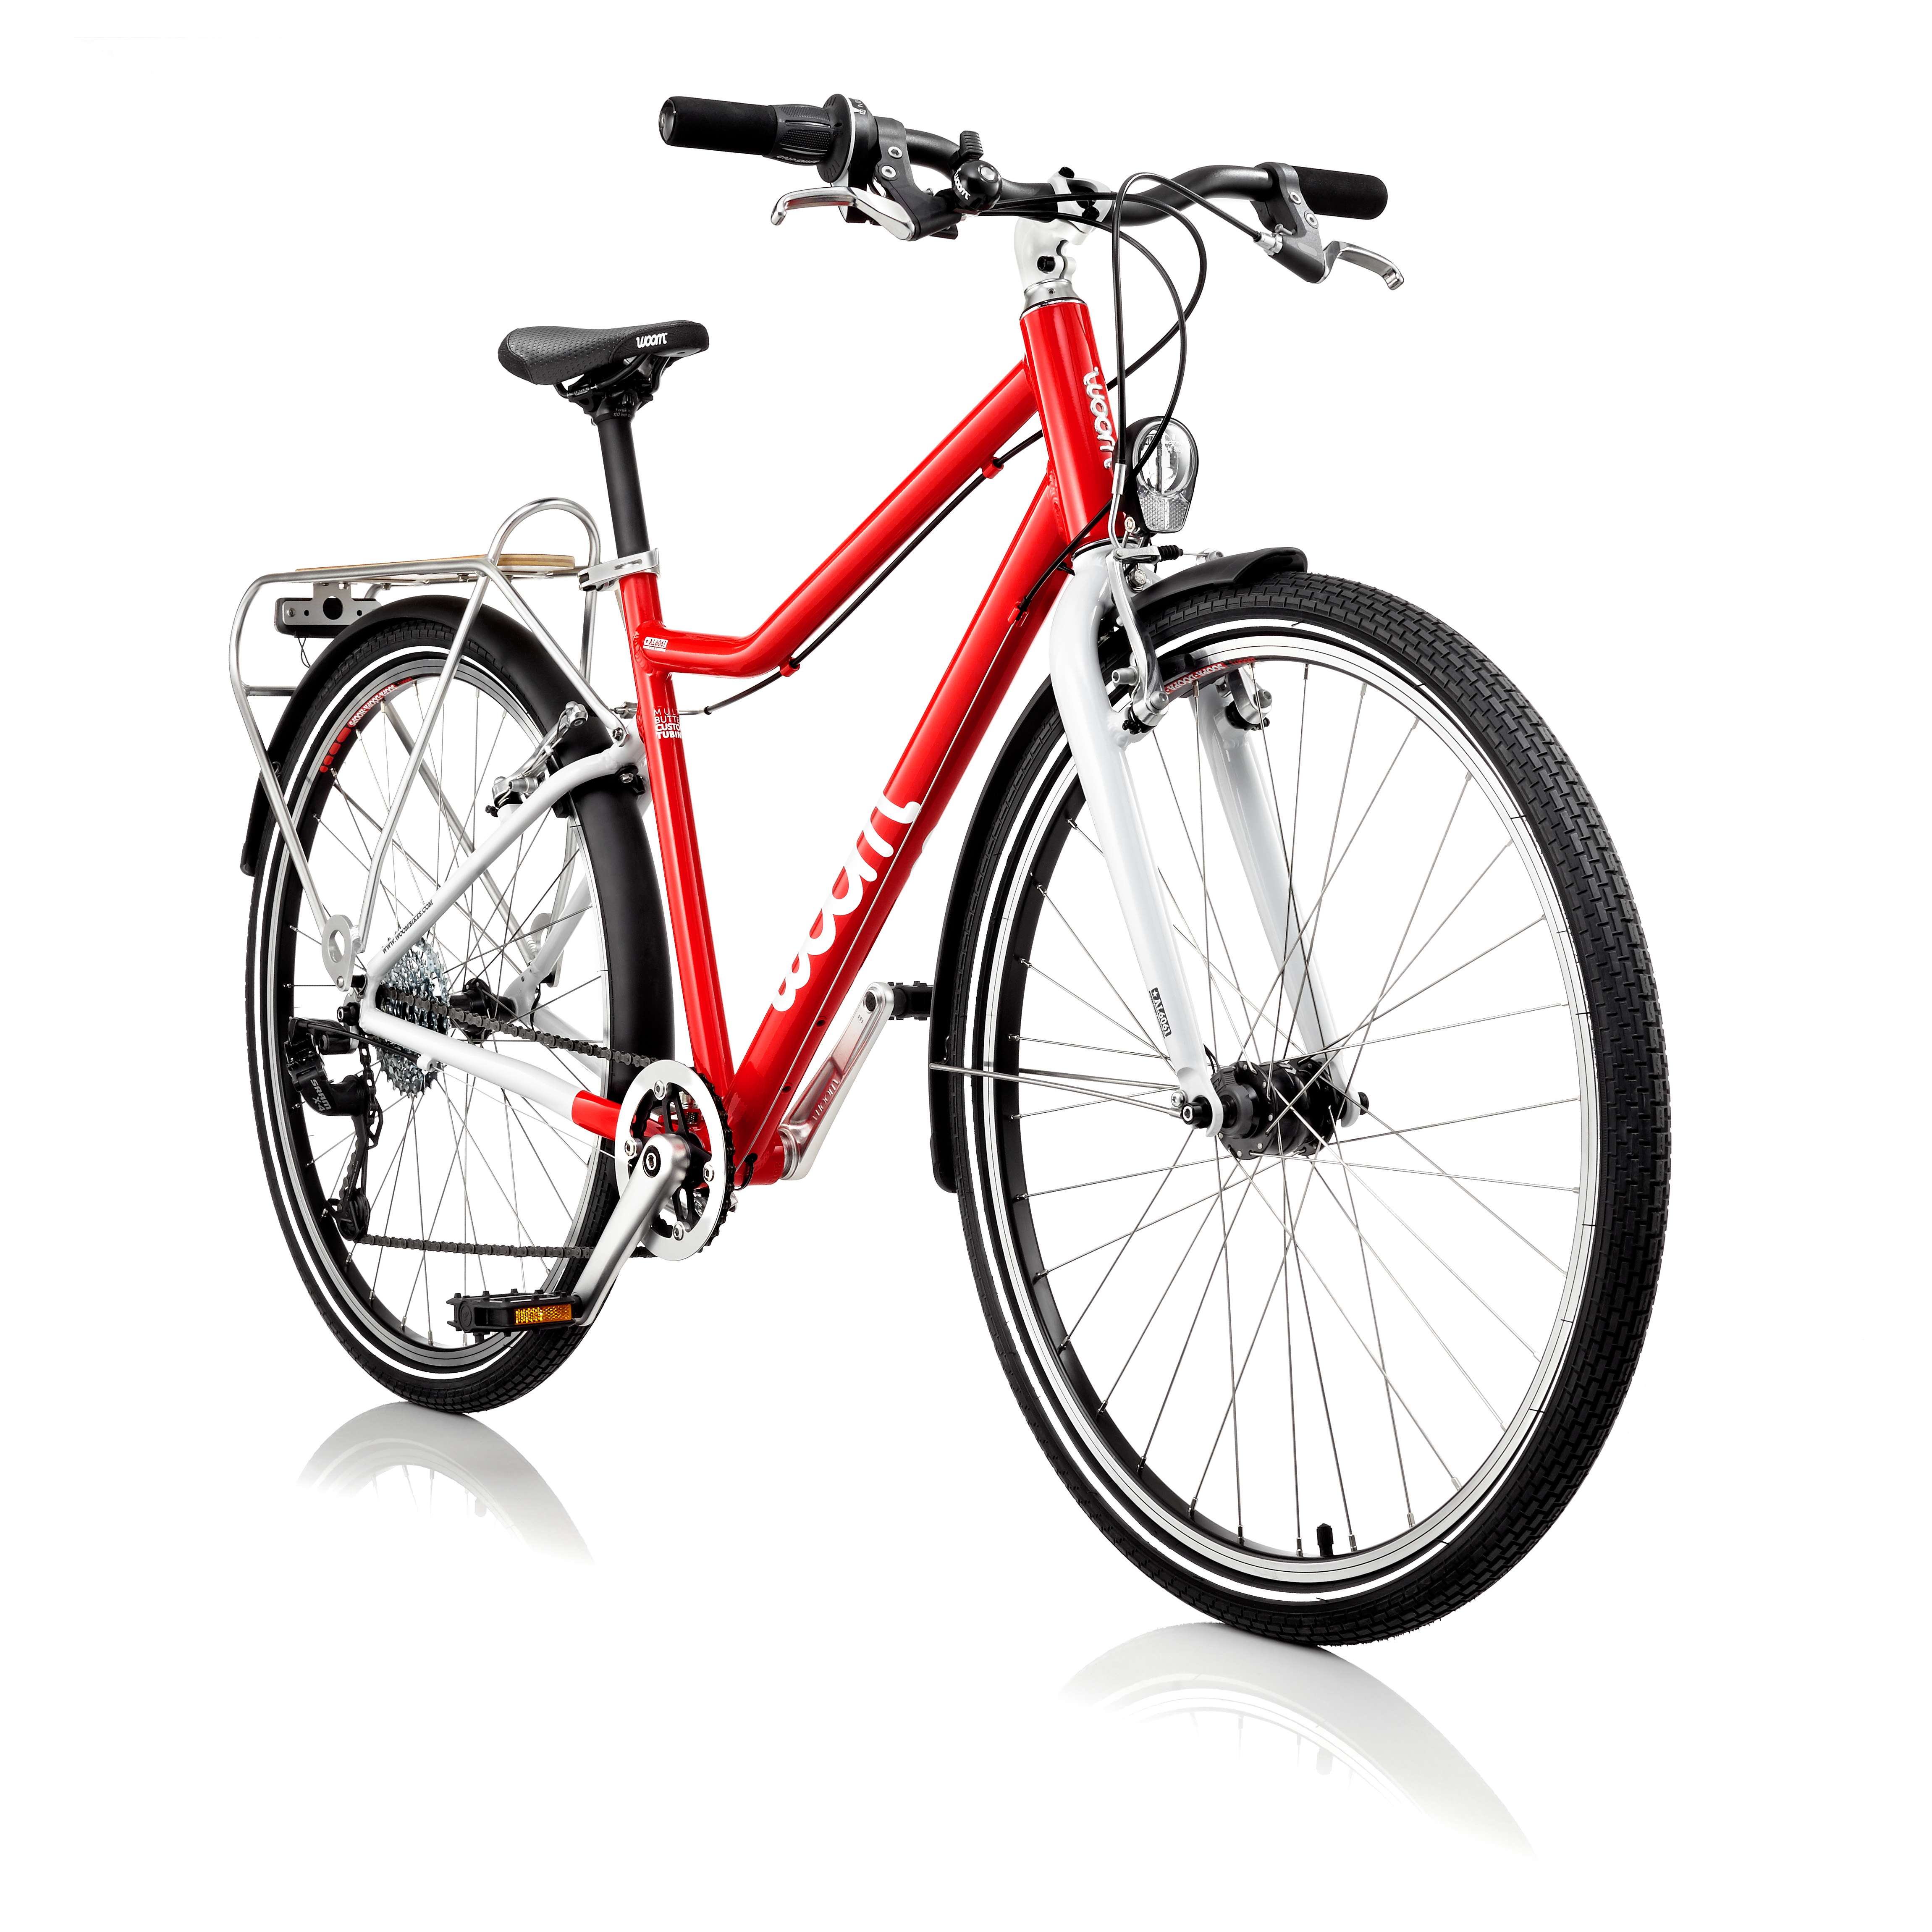 Woom's 6 City 26-inch model comes with an aluminum rear rack, a dynamo hub and LED front and rear lights. It retails for $599.